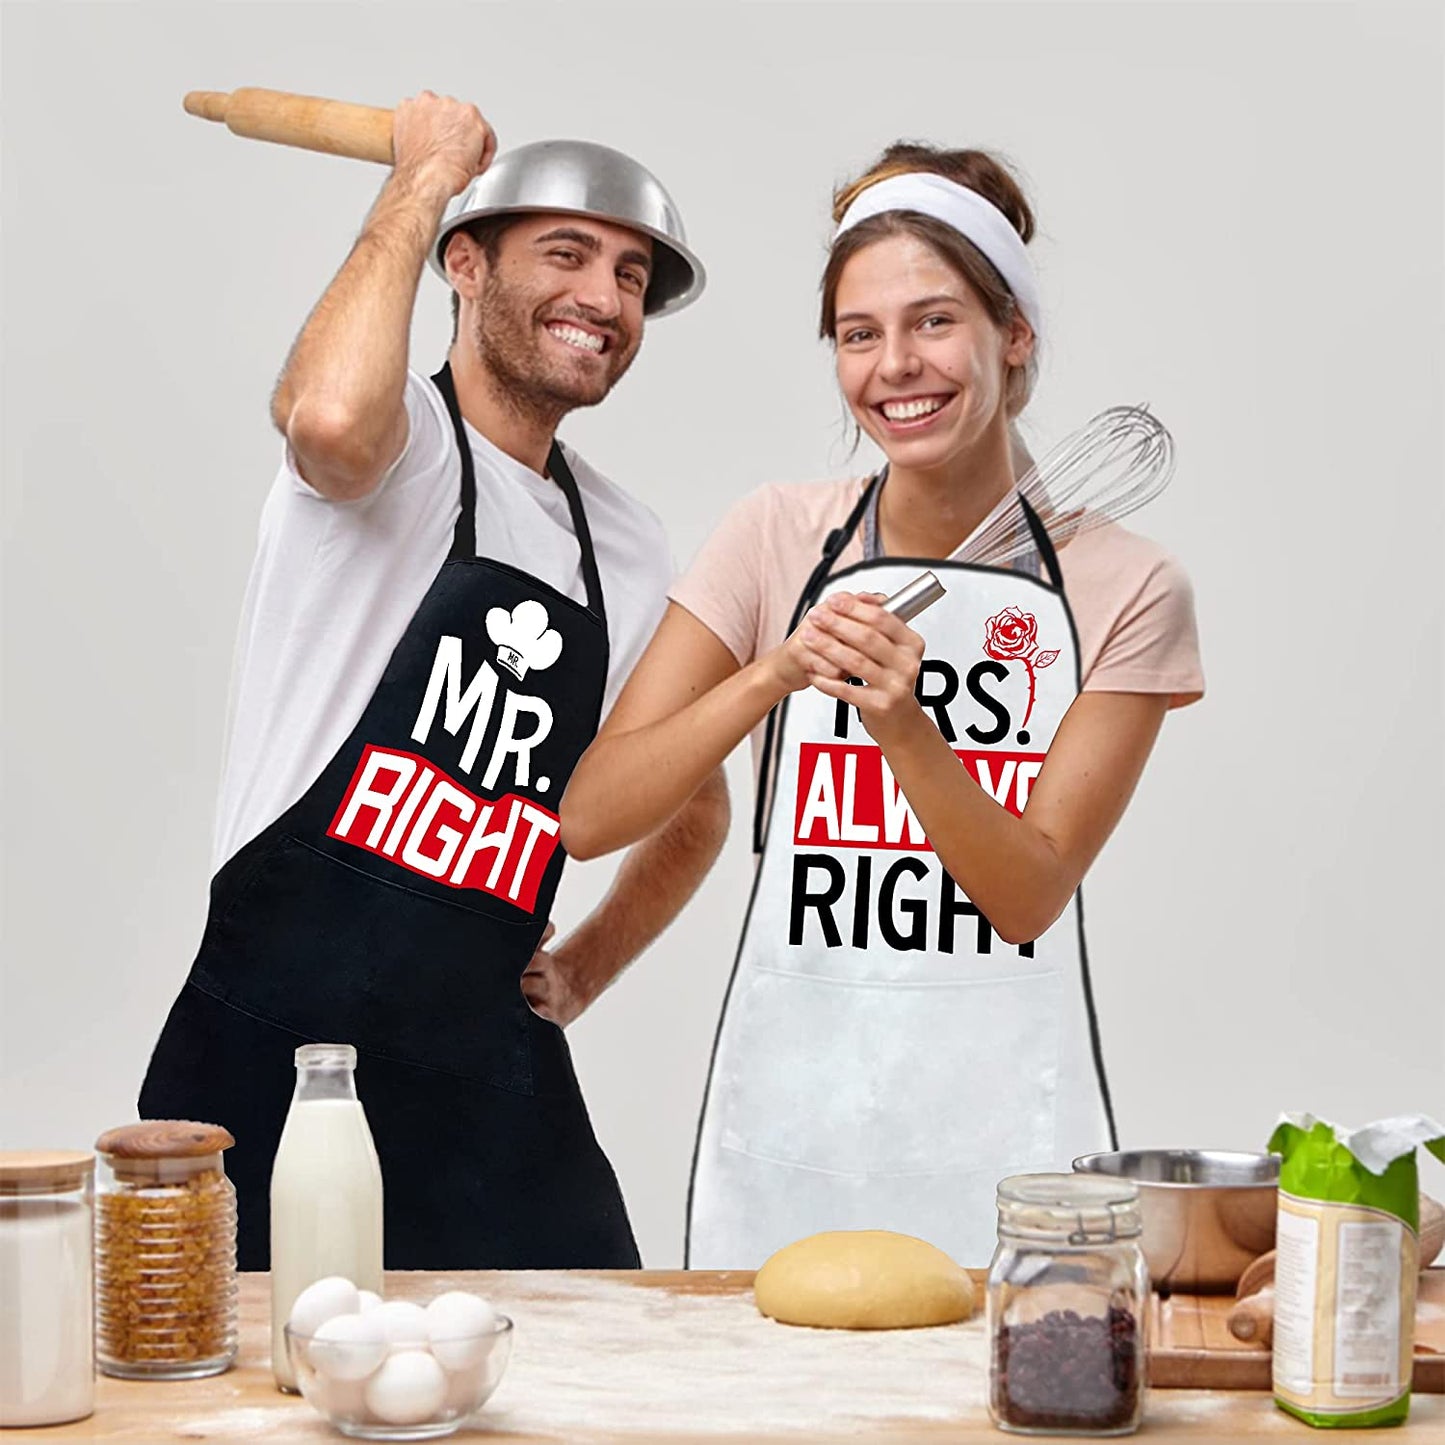 Mr Right Mrs Always Right,Couple Aprons